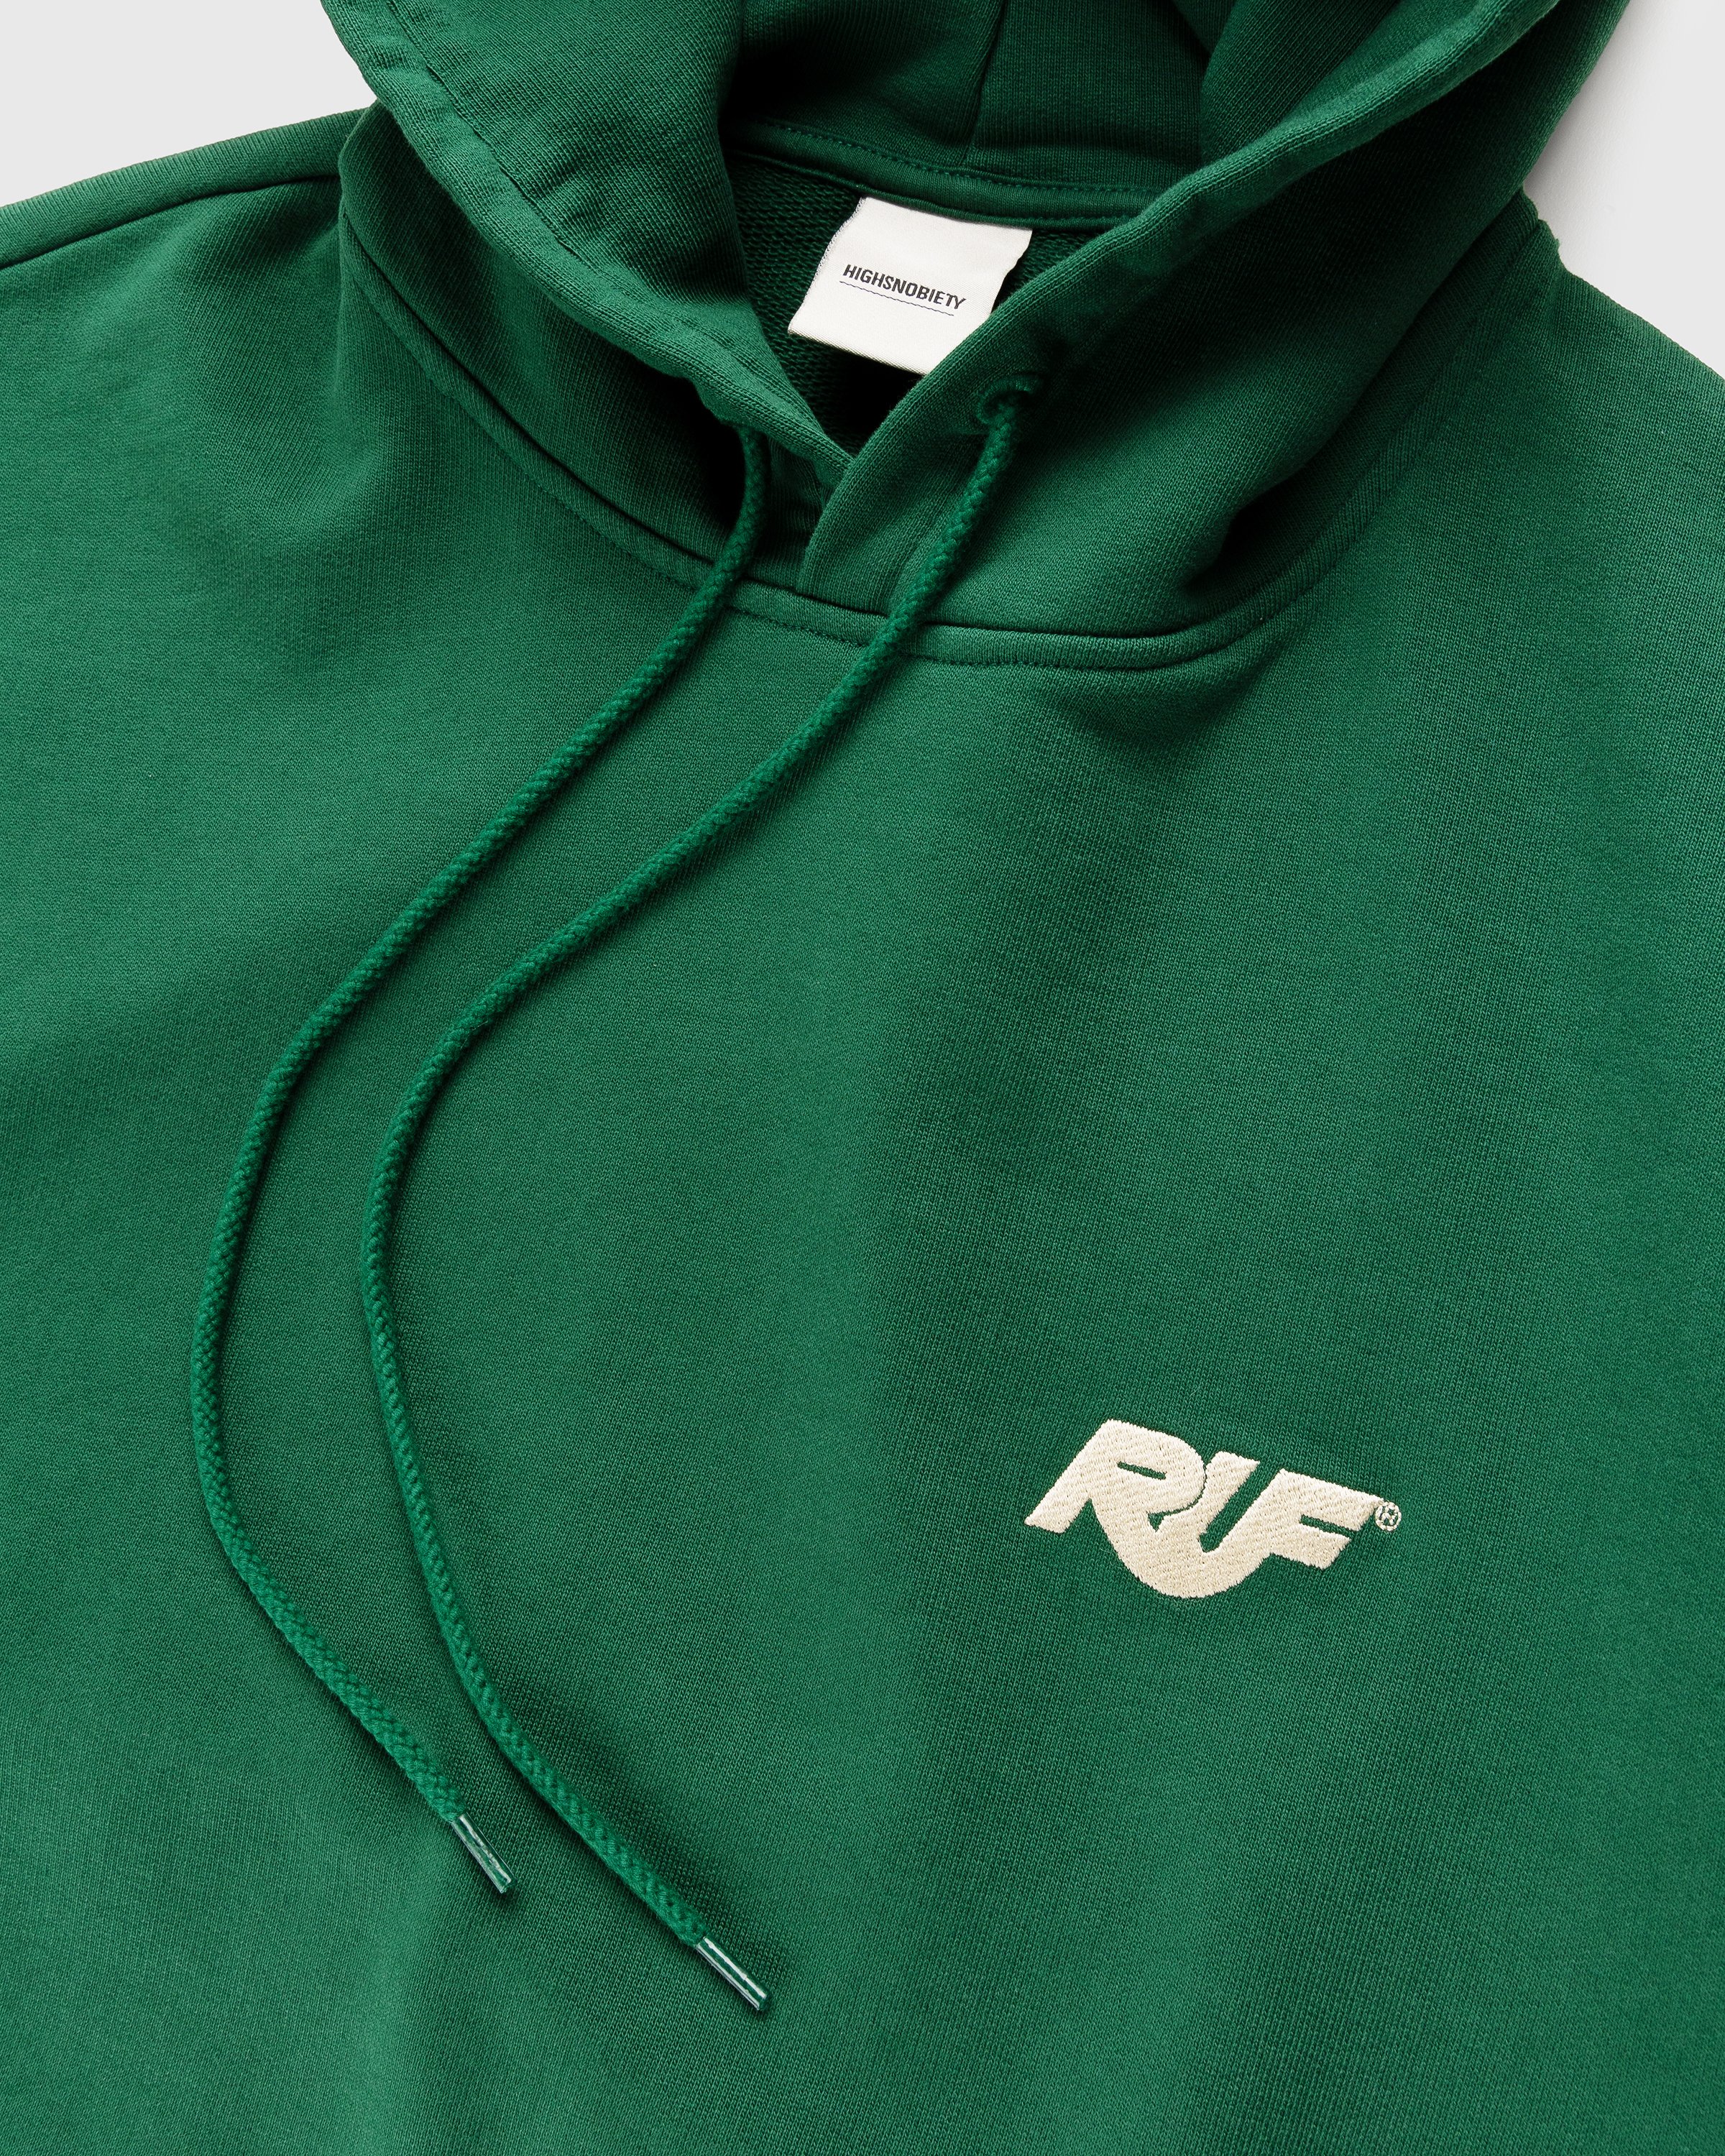 RUF x Highsnobiety - Logo Embroidered Hoodie Green - Clothing - Green - Image 6